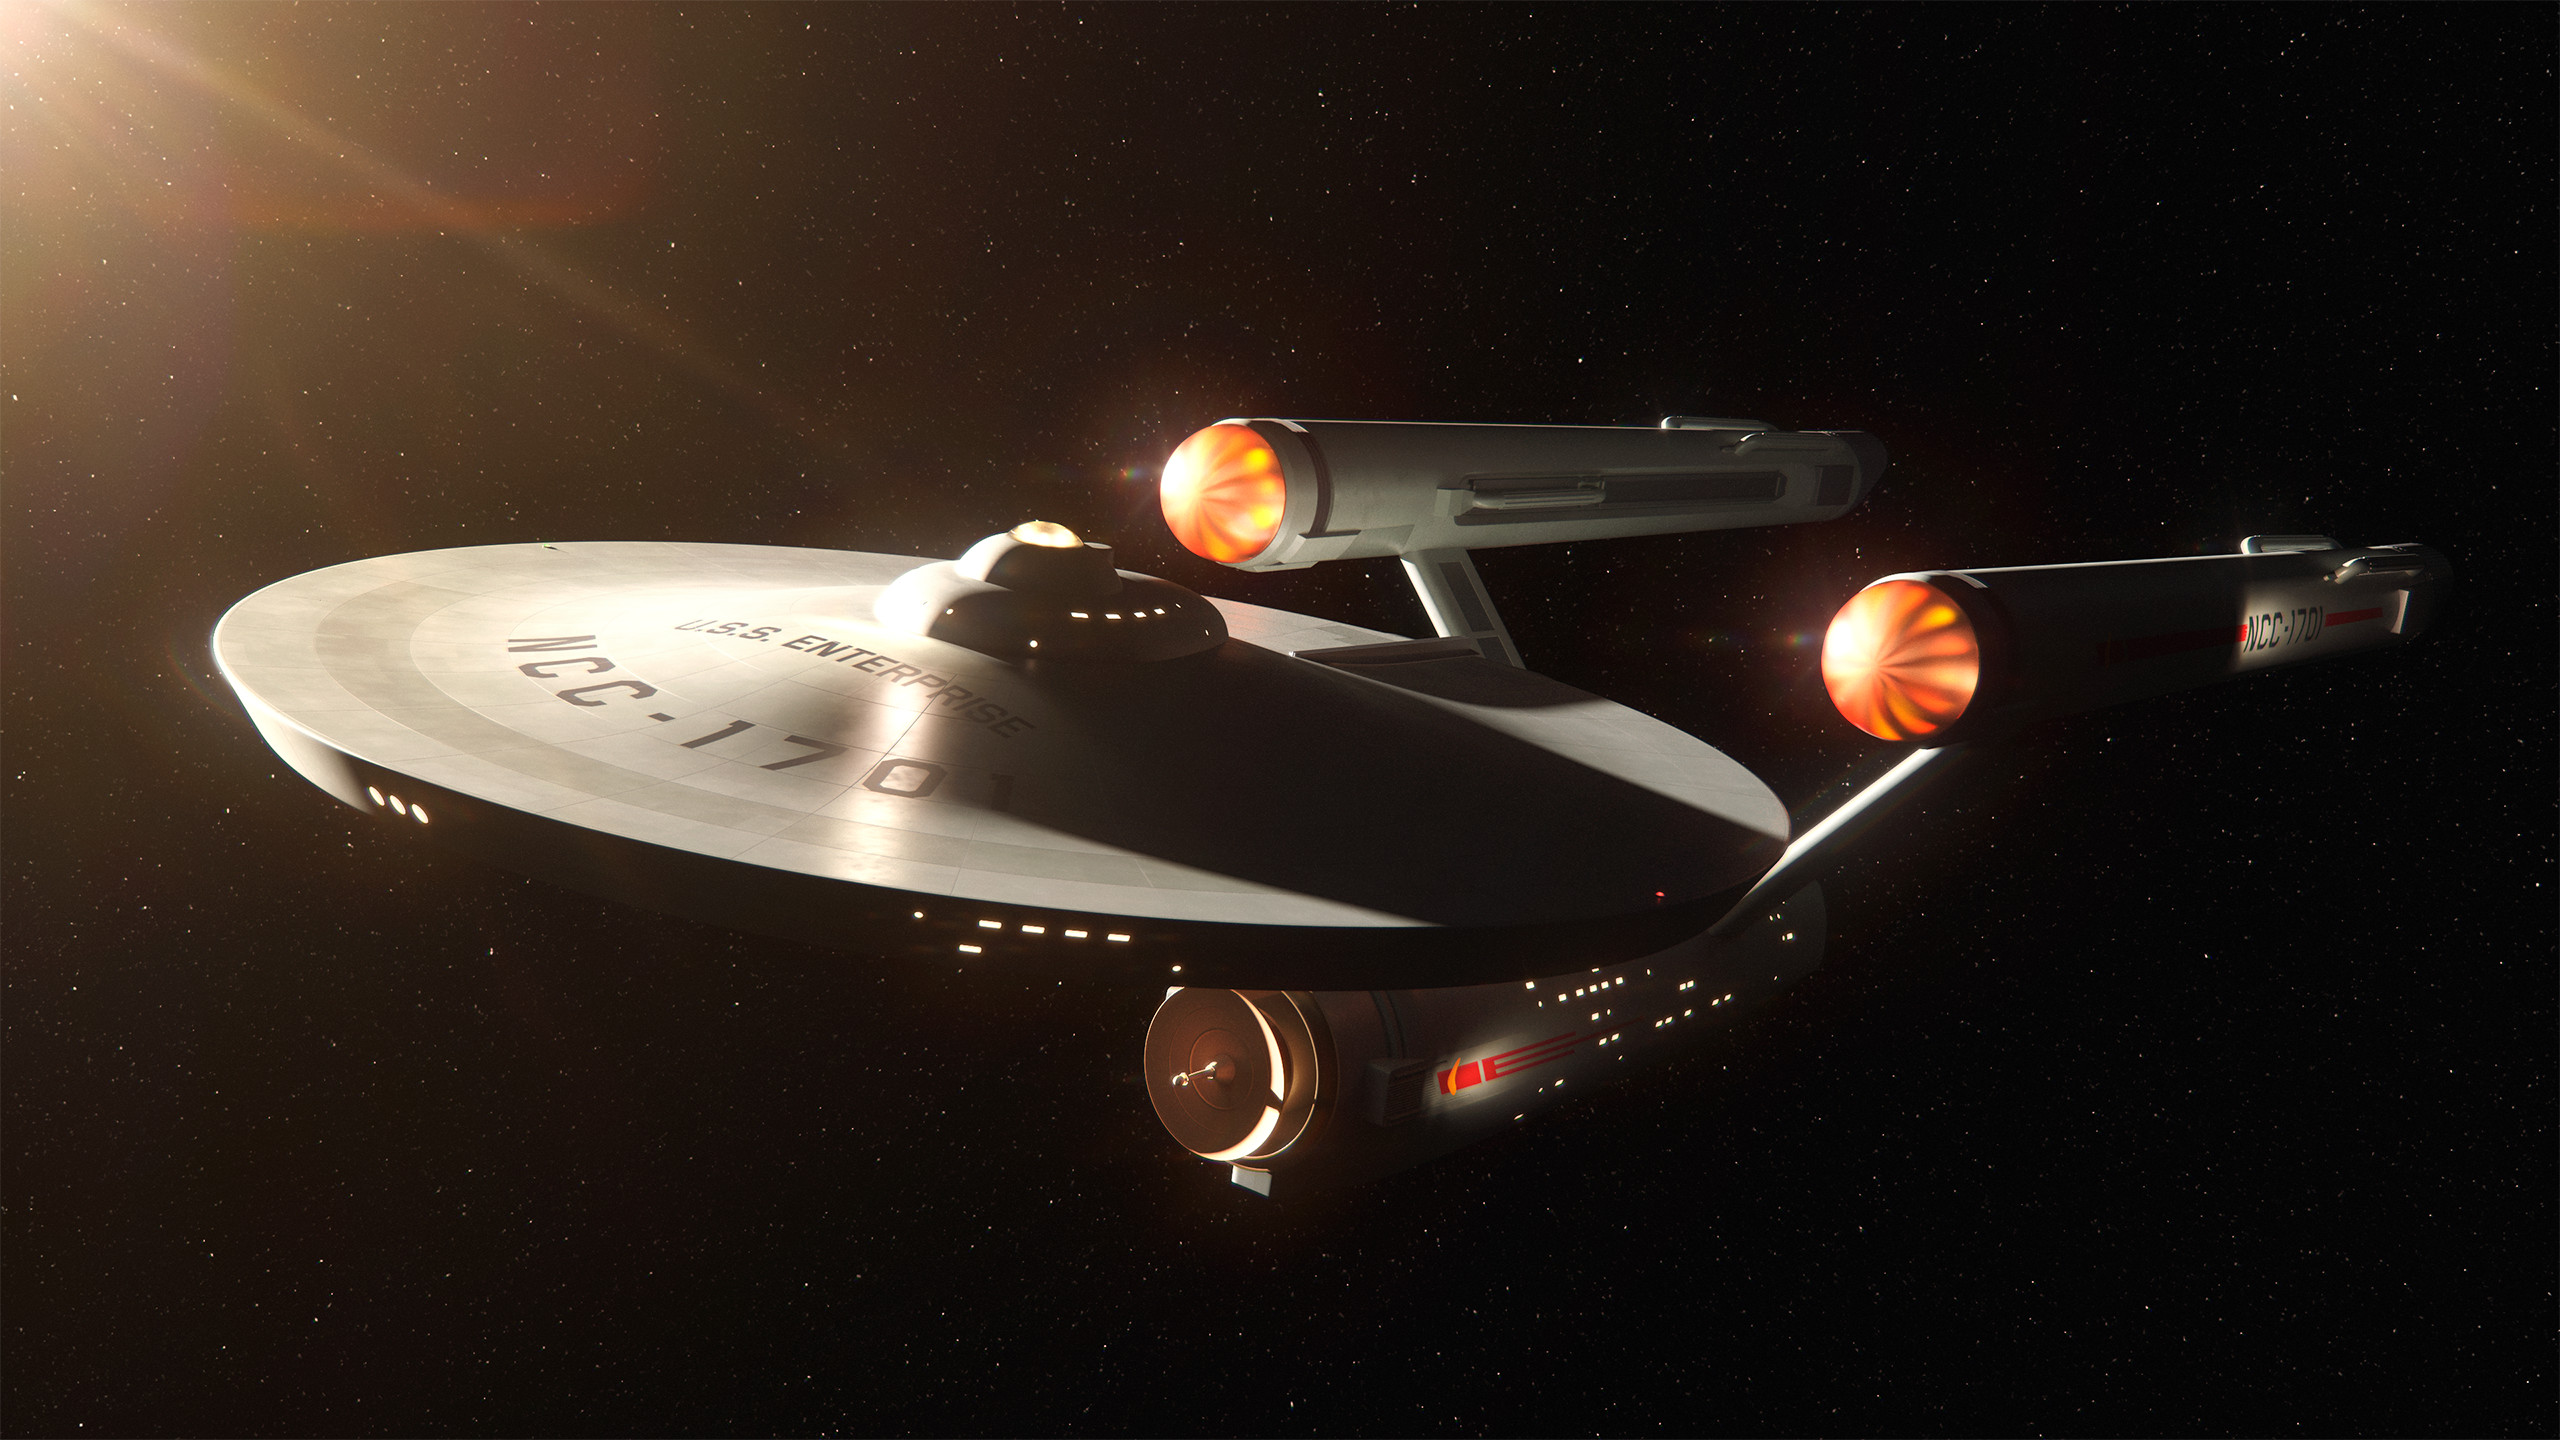 uss enterprise star trek what does uss stand for